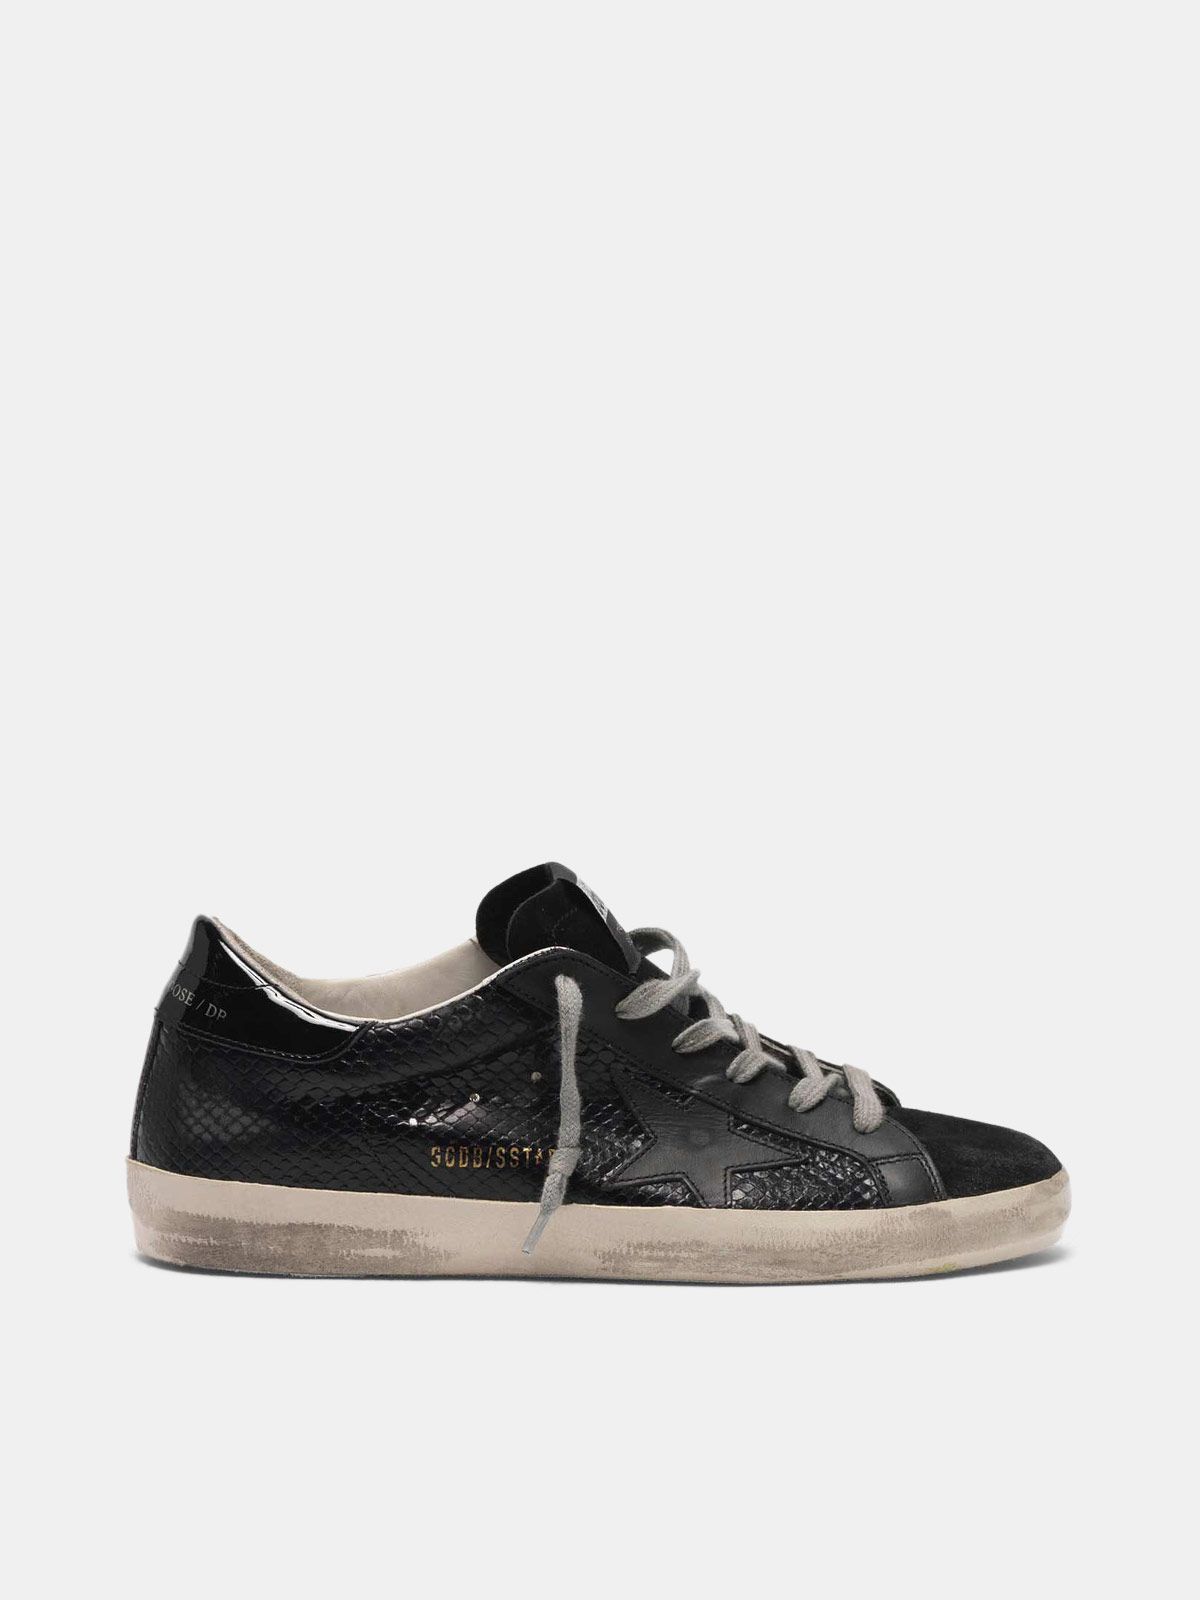 black suede and snakeskin print leather 